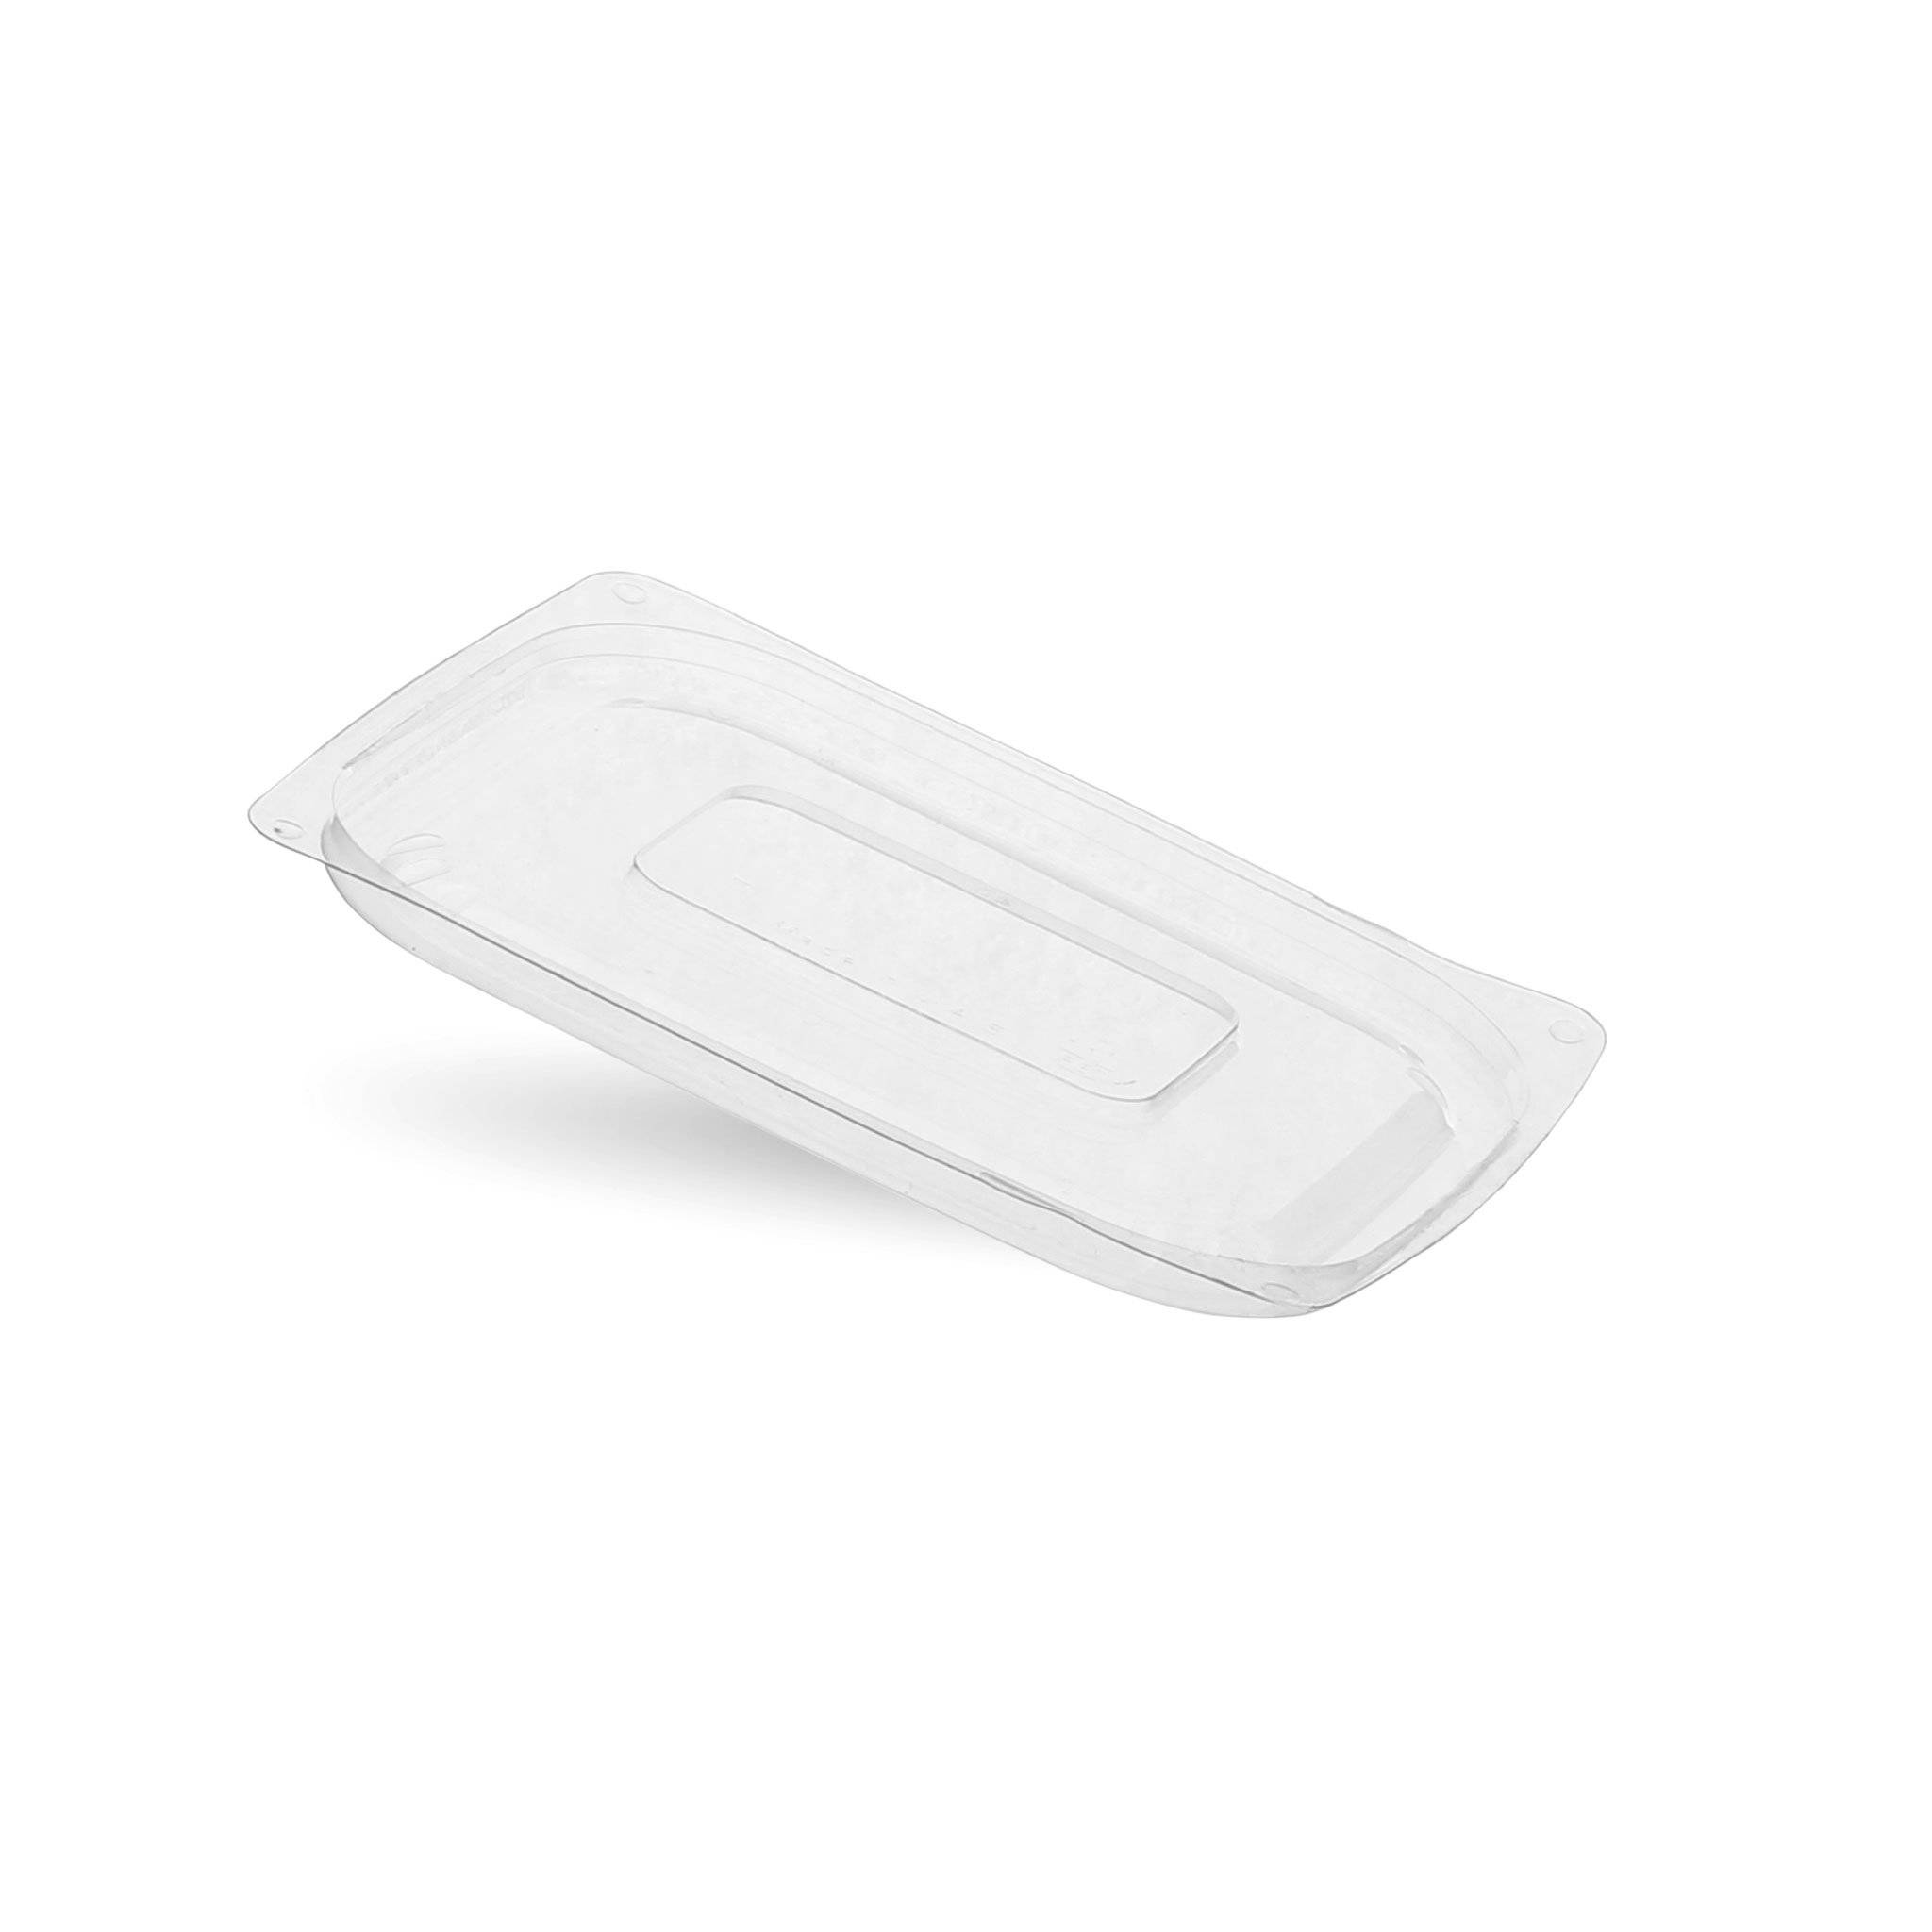 Hotpack Clear Lids For 8/12/16 Oz Containers - Hotpack Global